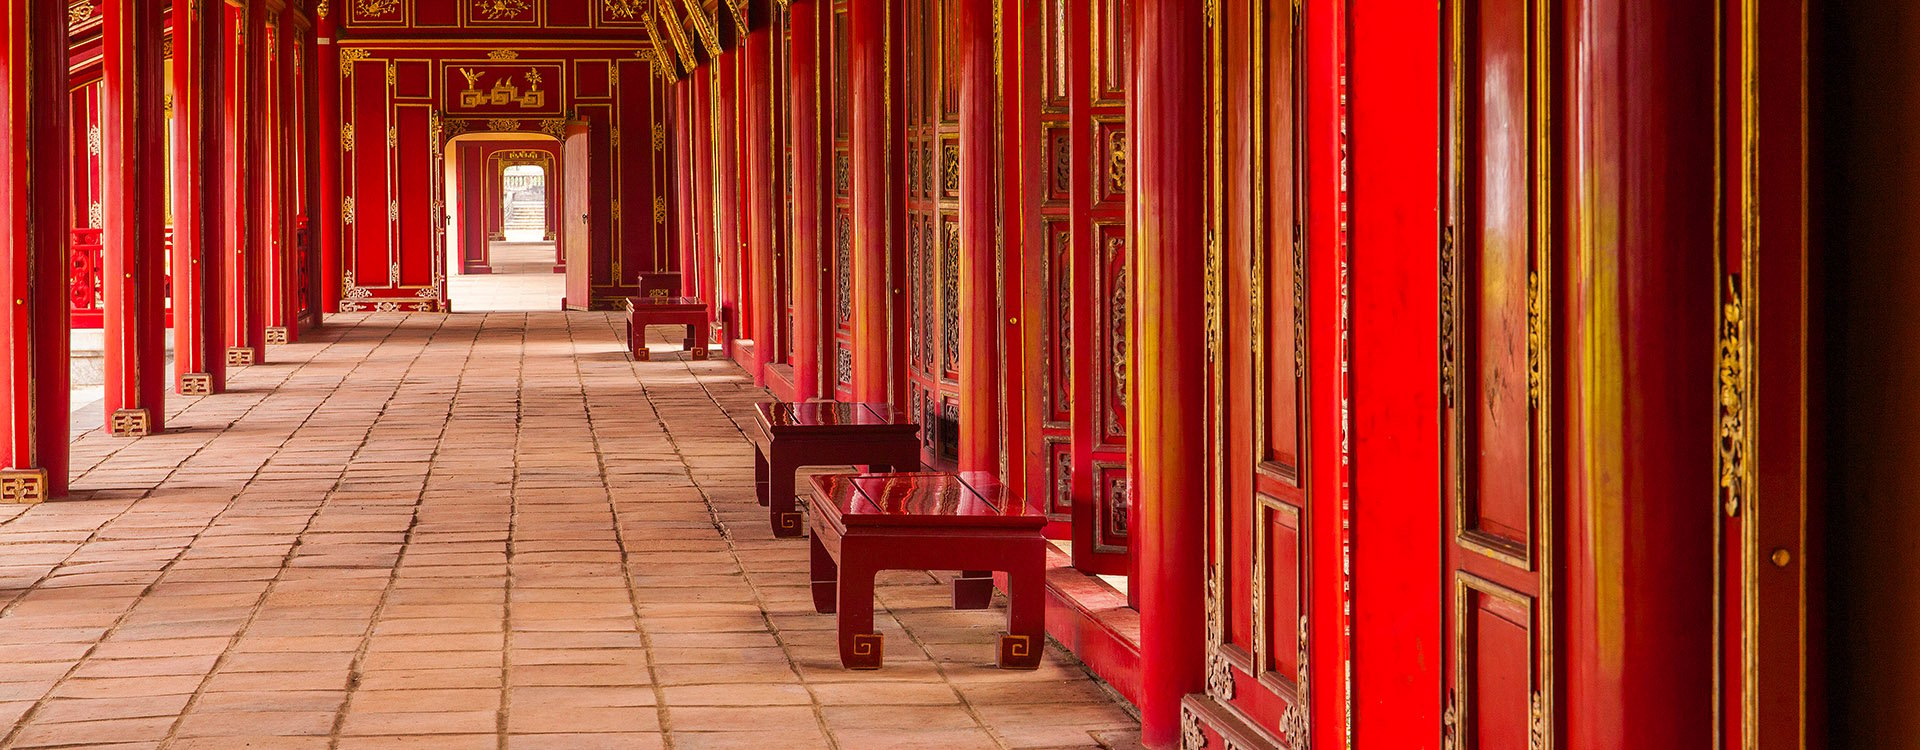 Red, wooden hallway of the Royal Palace, a UNESCO World Heritage site in Hue, Vietnam